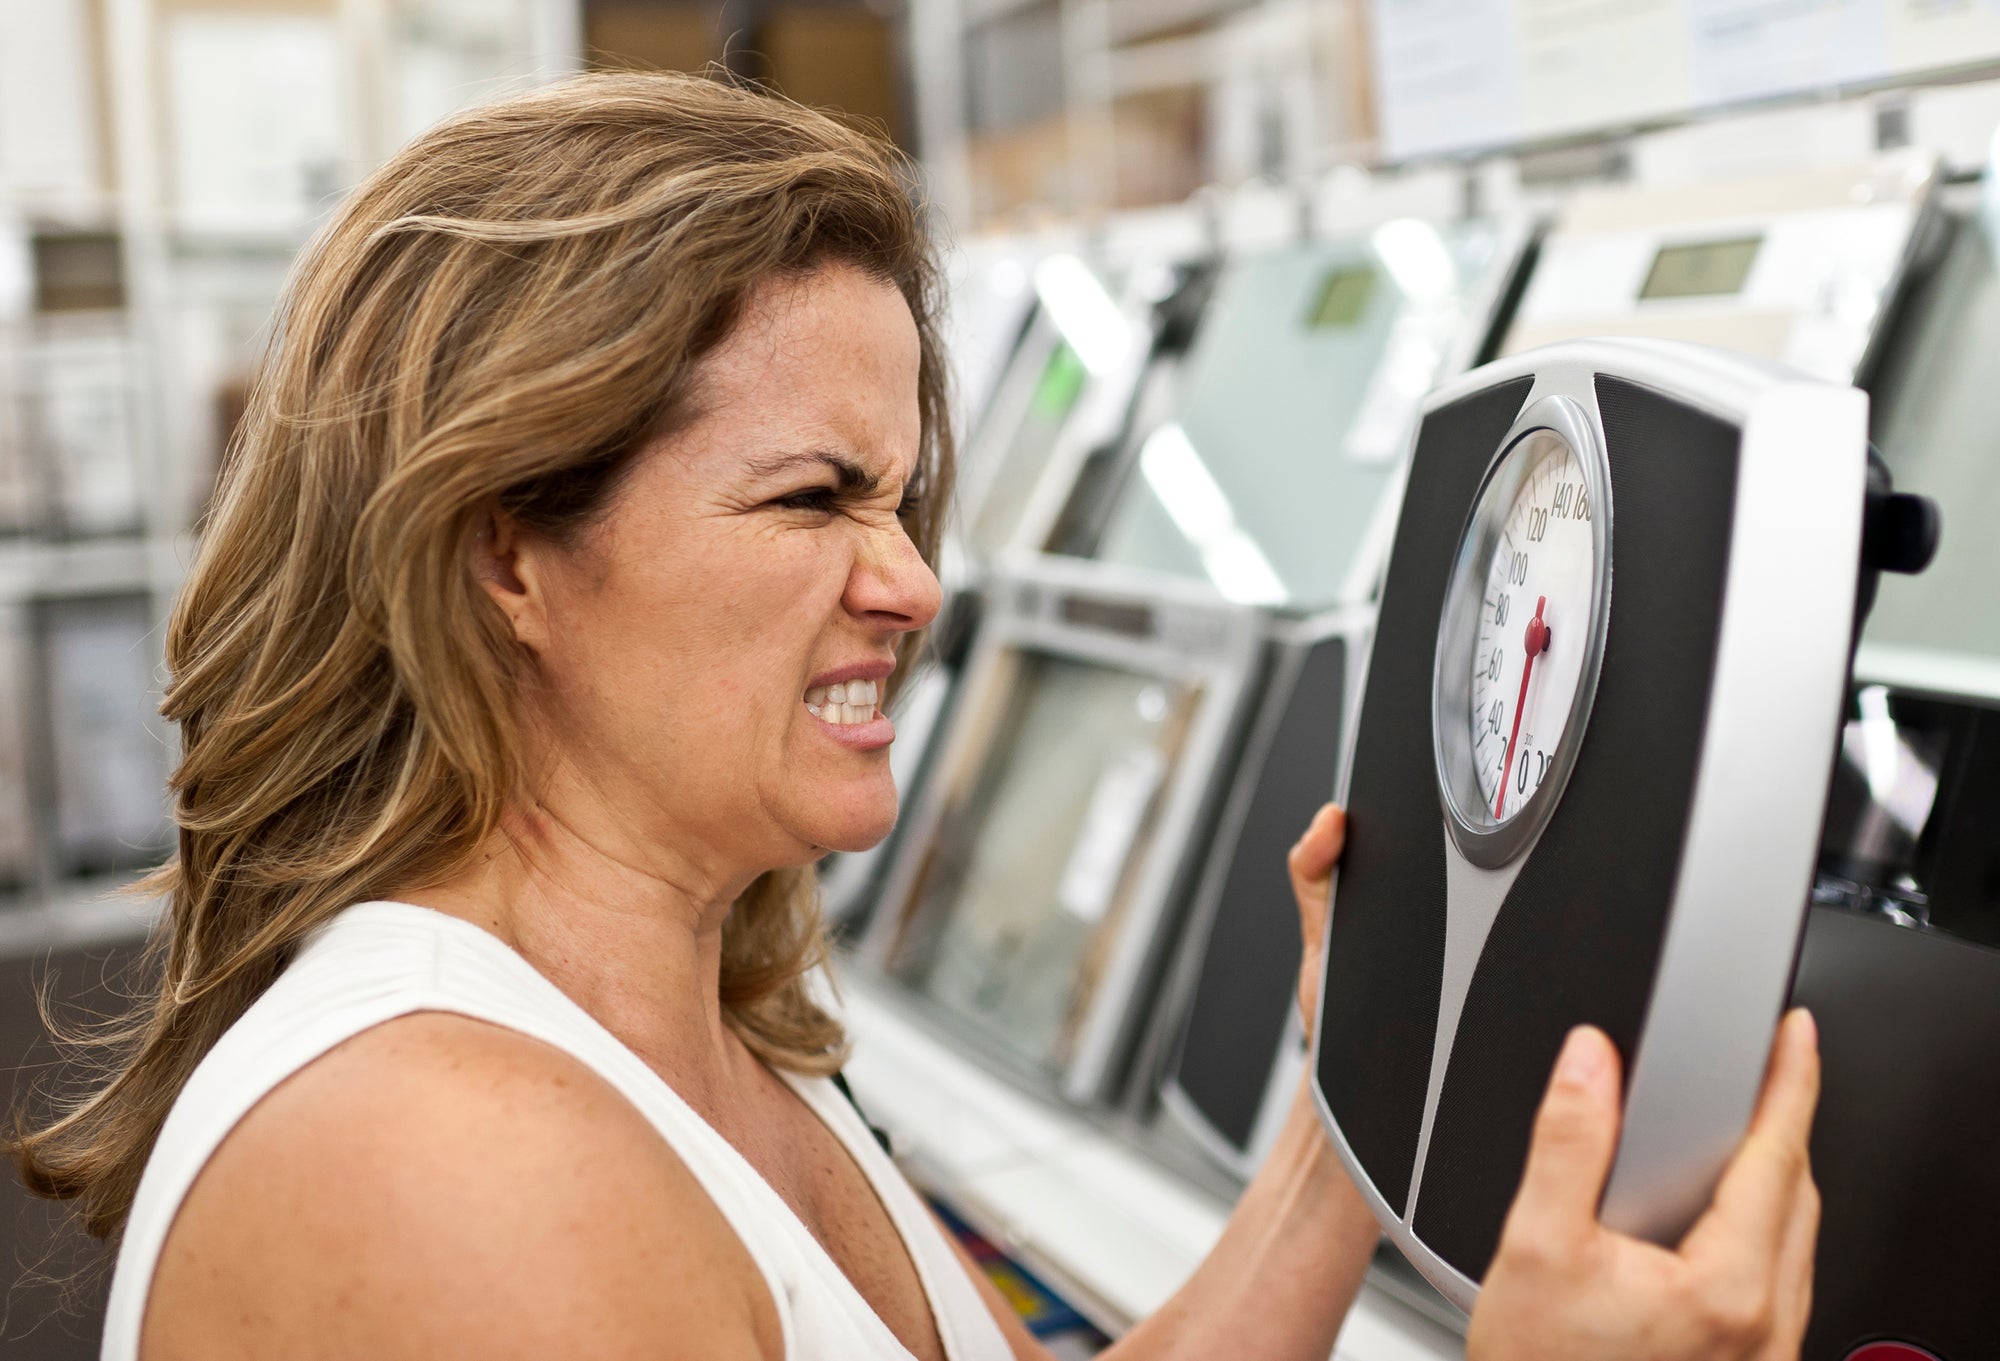 Stressed woman is angry at her scale